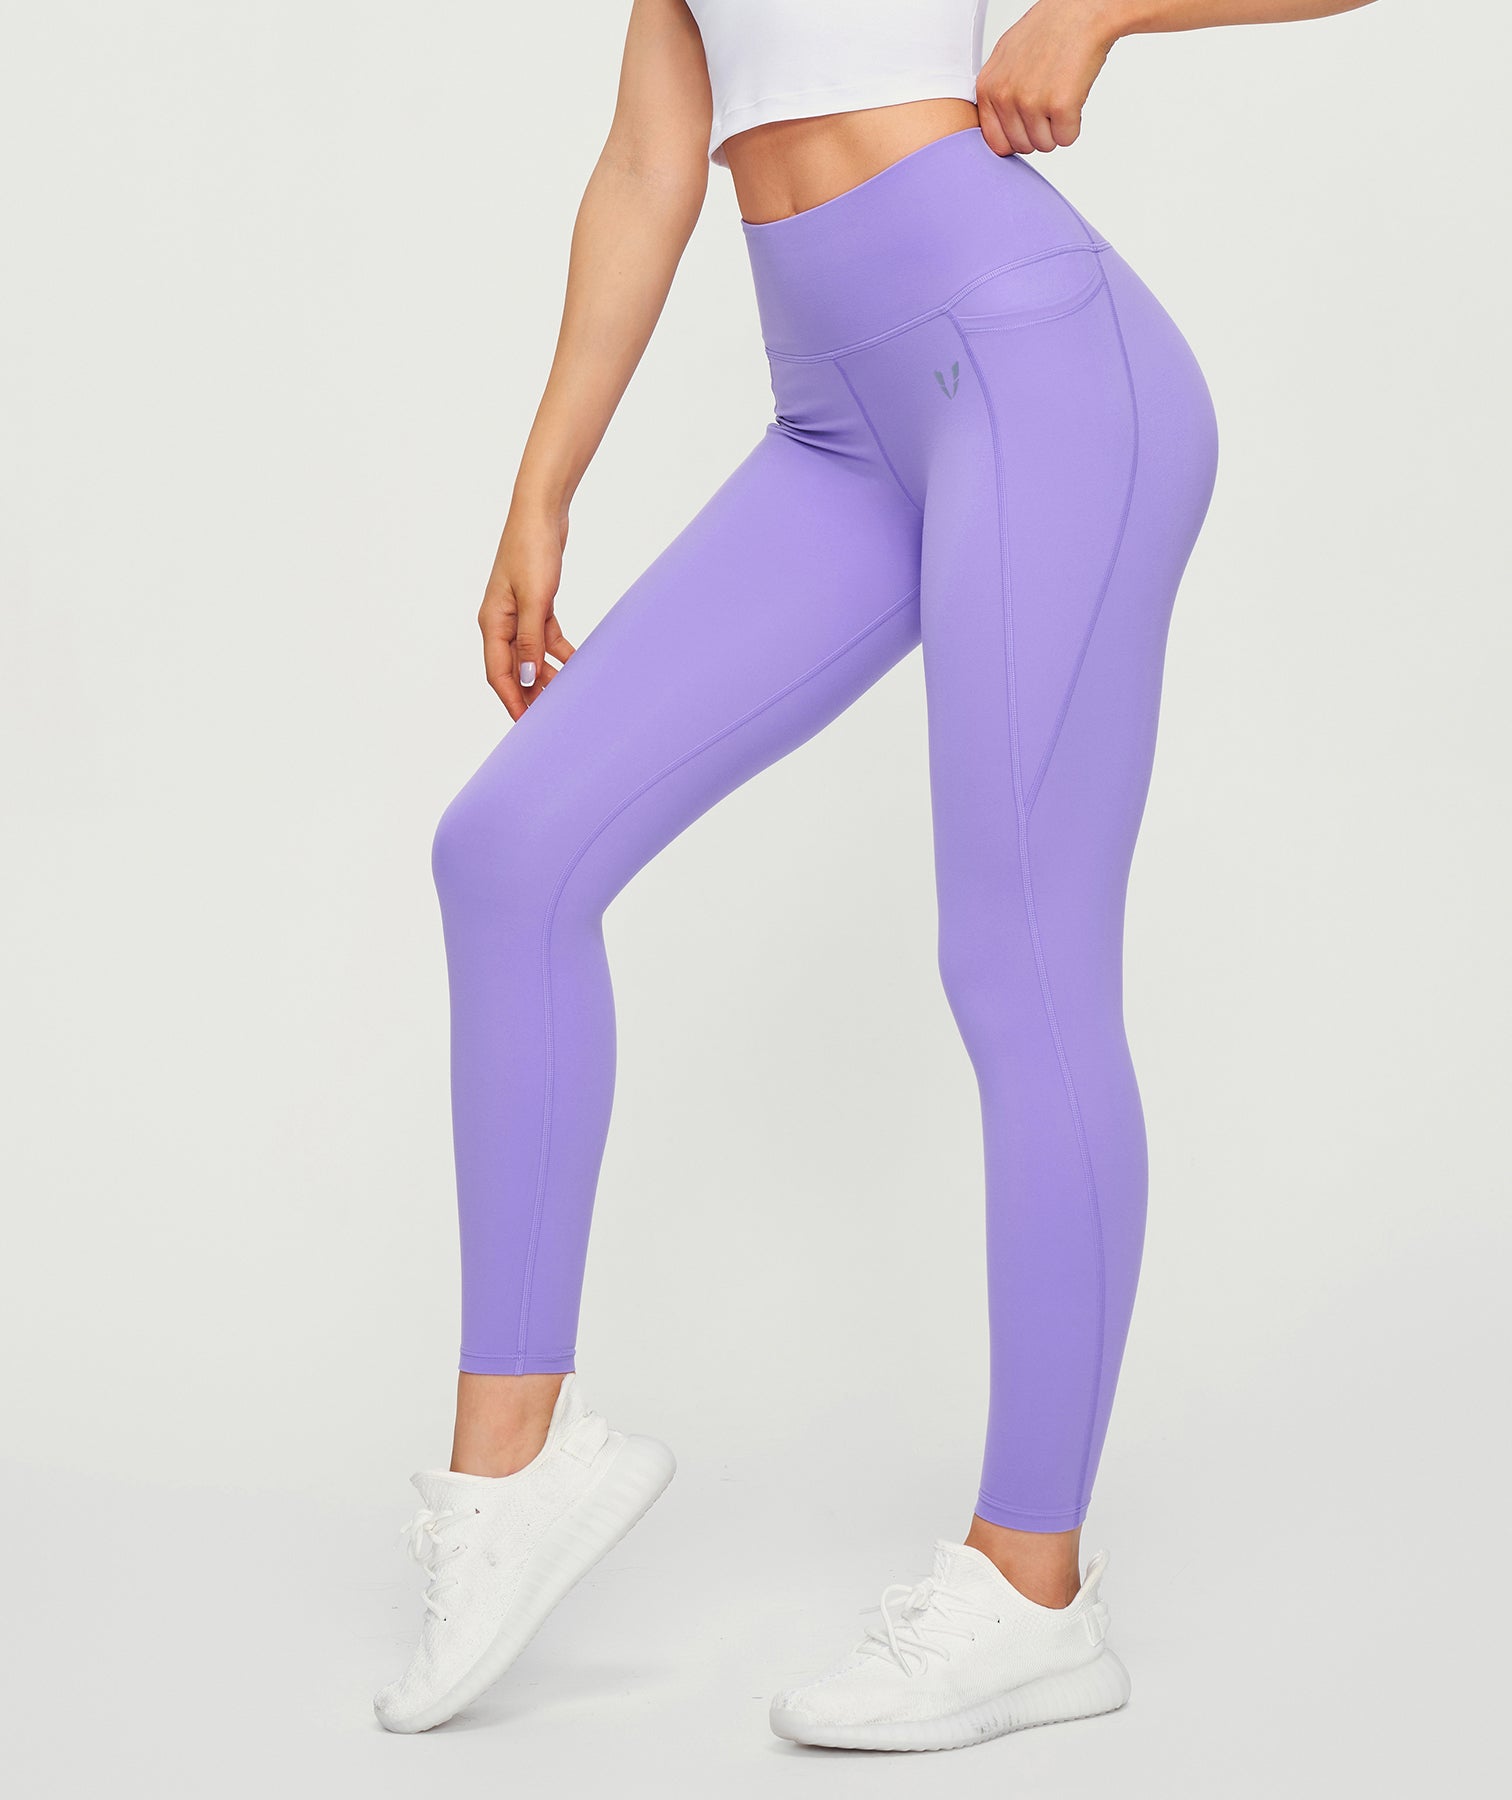 Butter Basic Leggings With Pockets - Peri Lavender Small